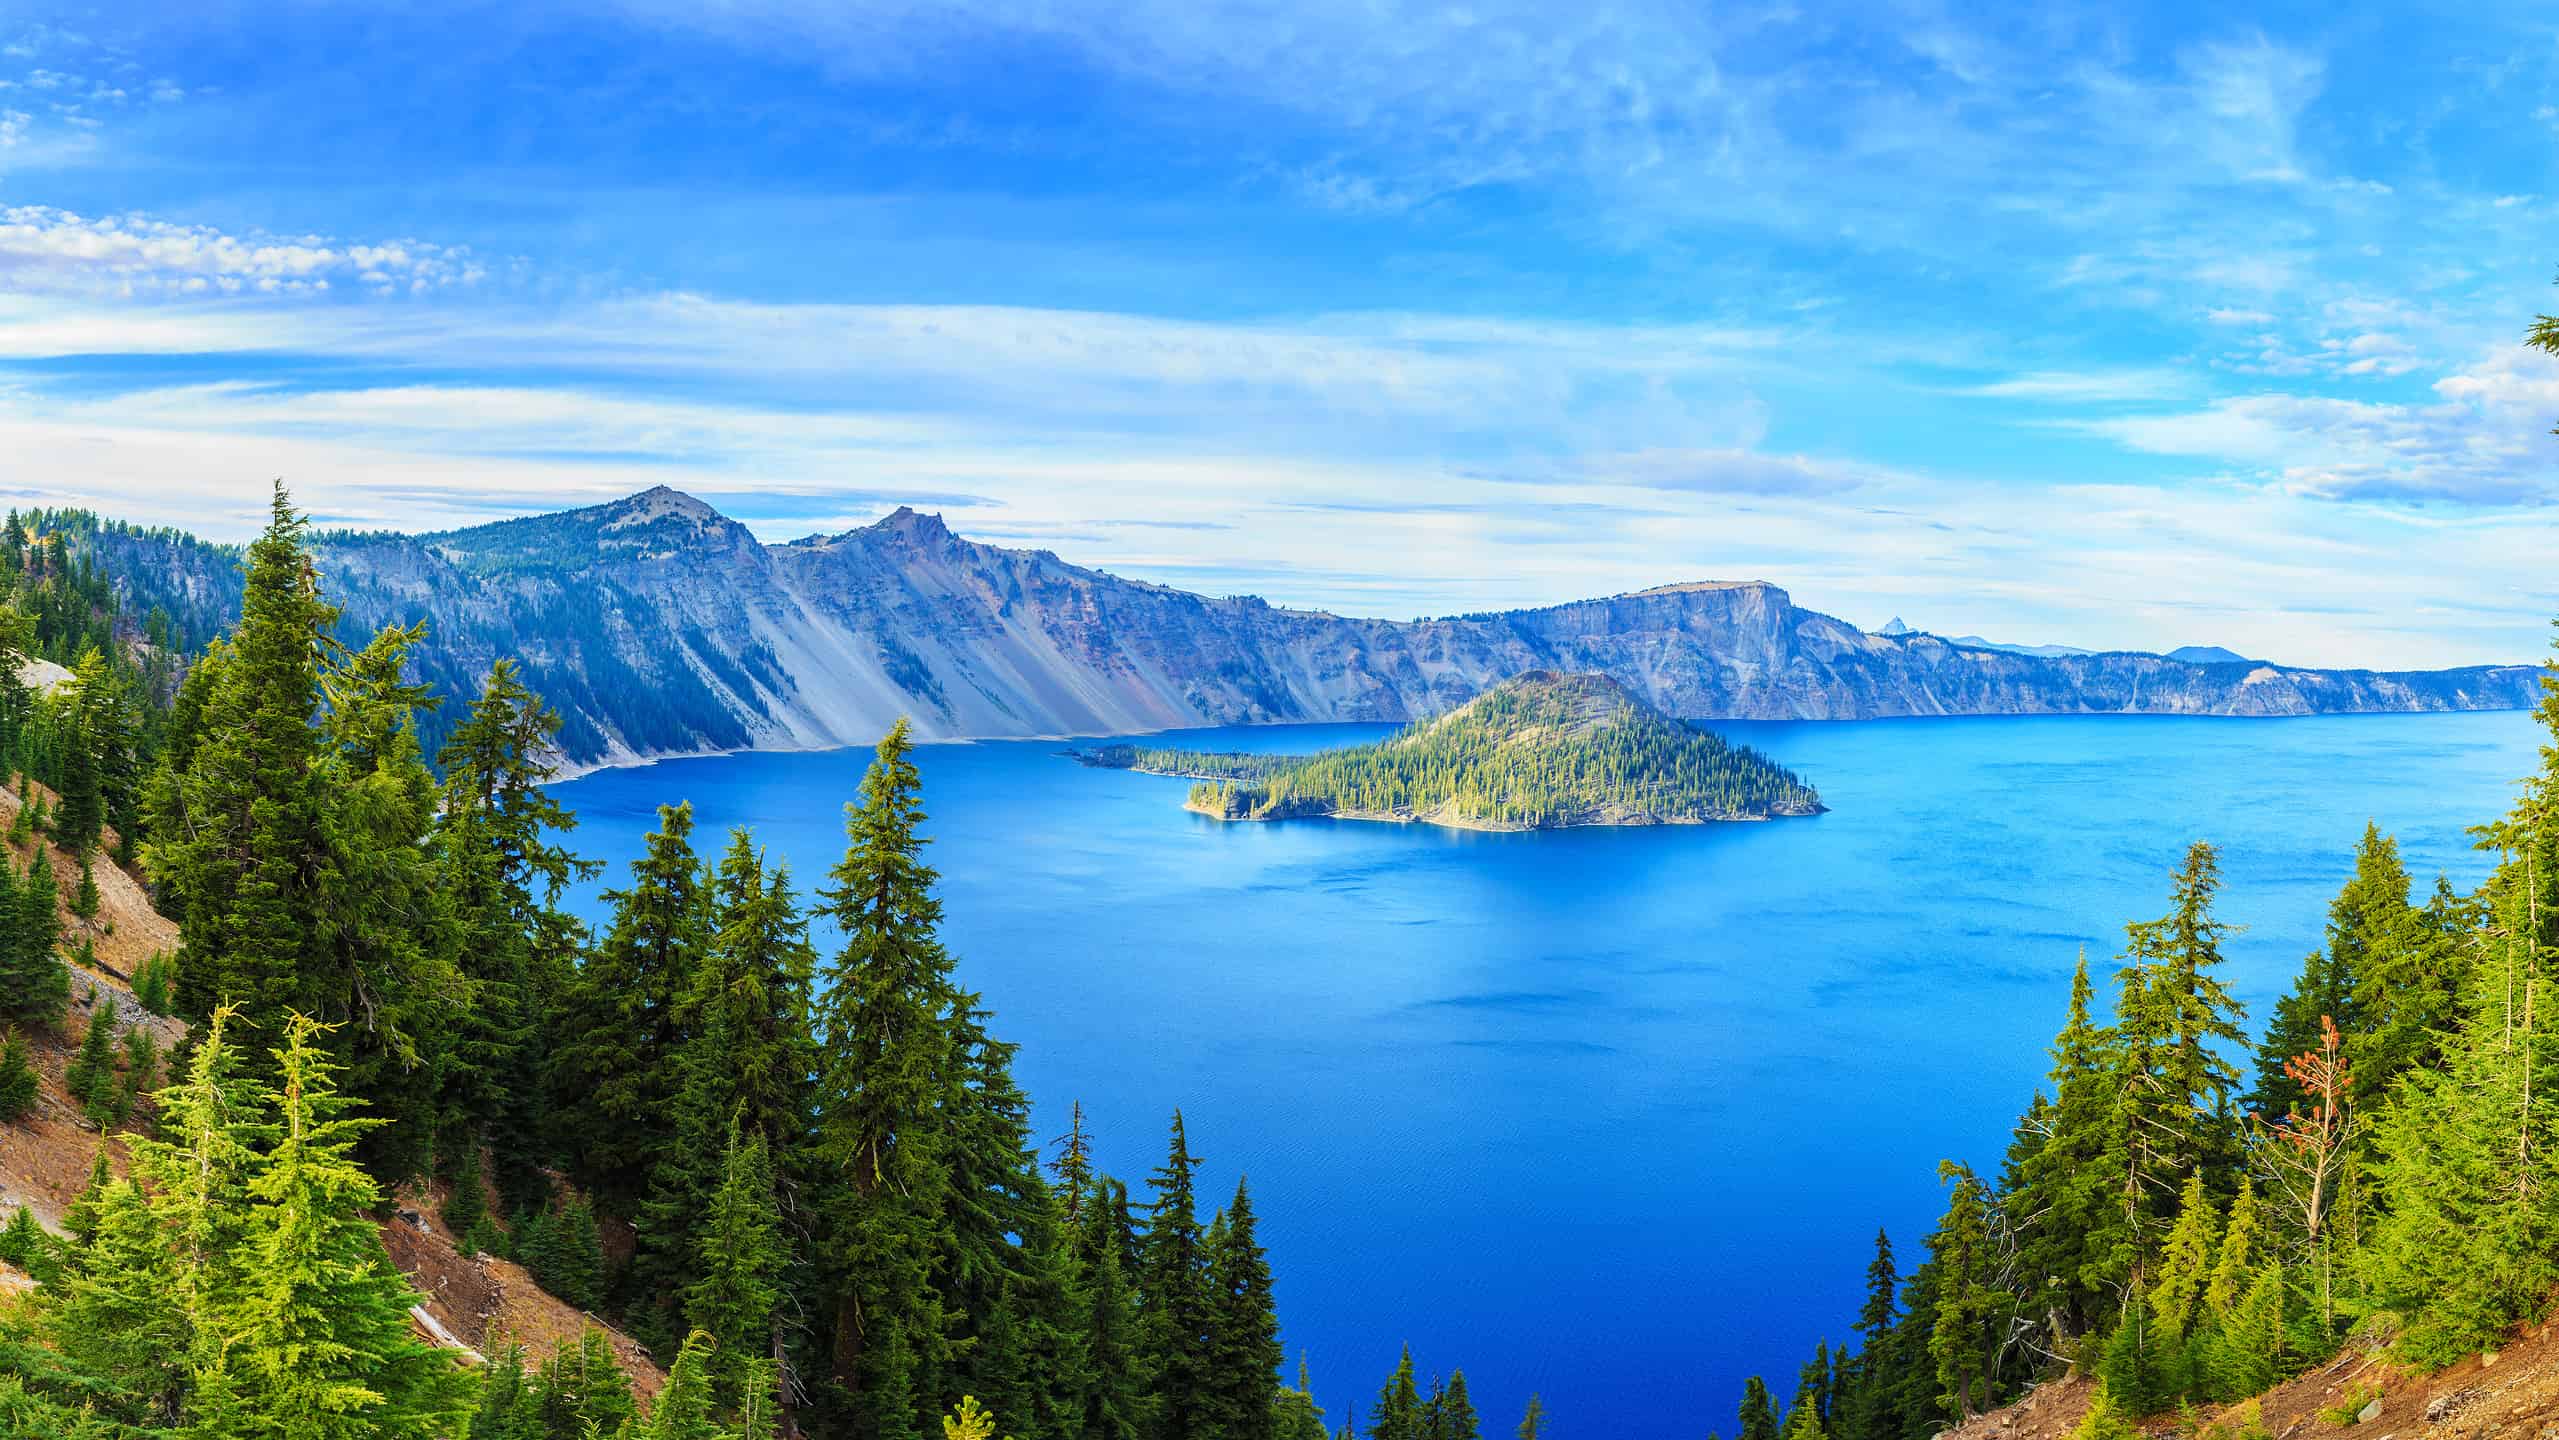 A beautiful view of Crater Lake in Oregon.